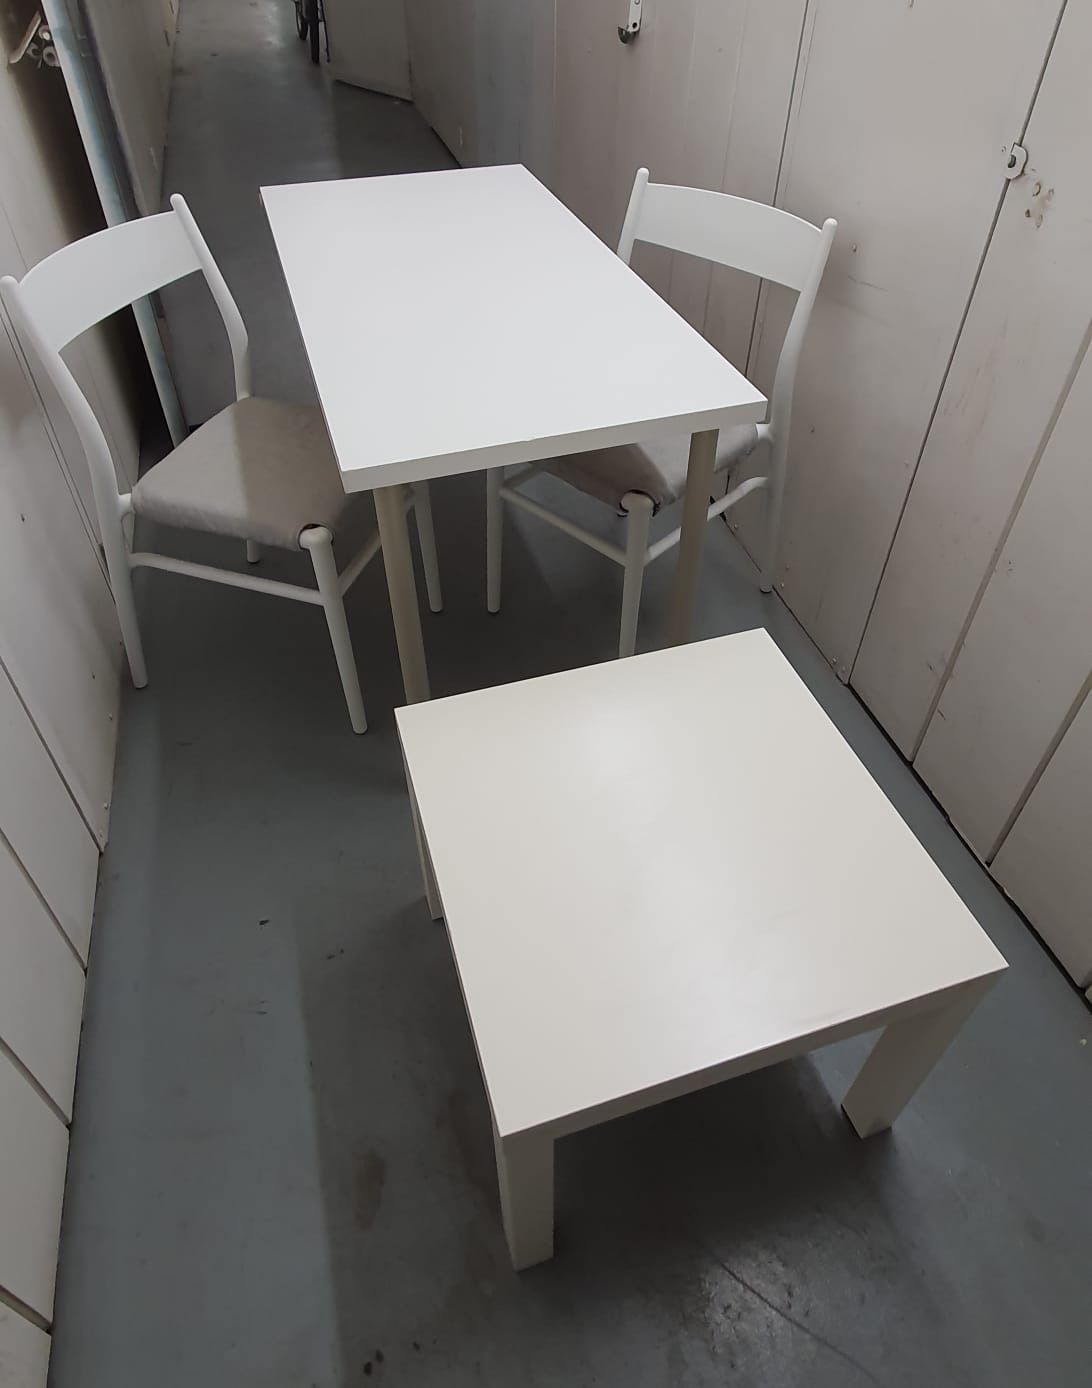 Ikea table and 2 chairs + lack table